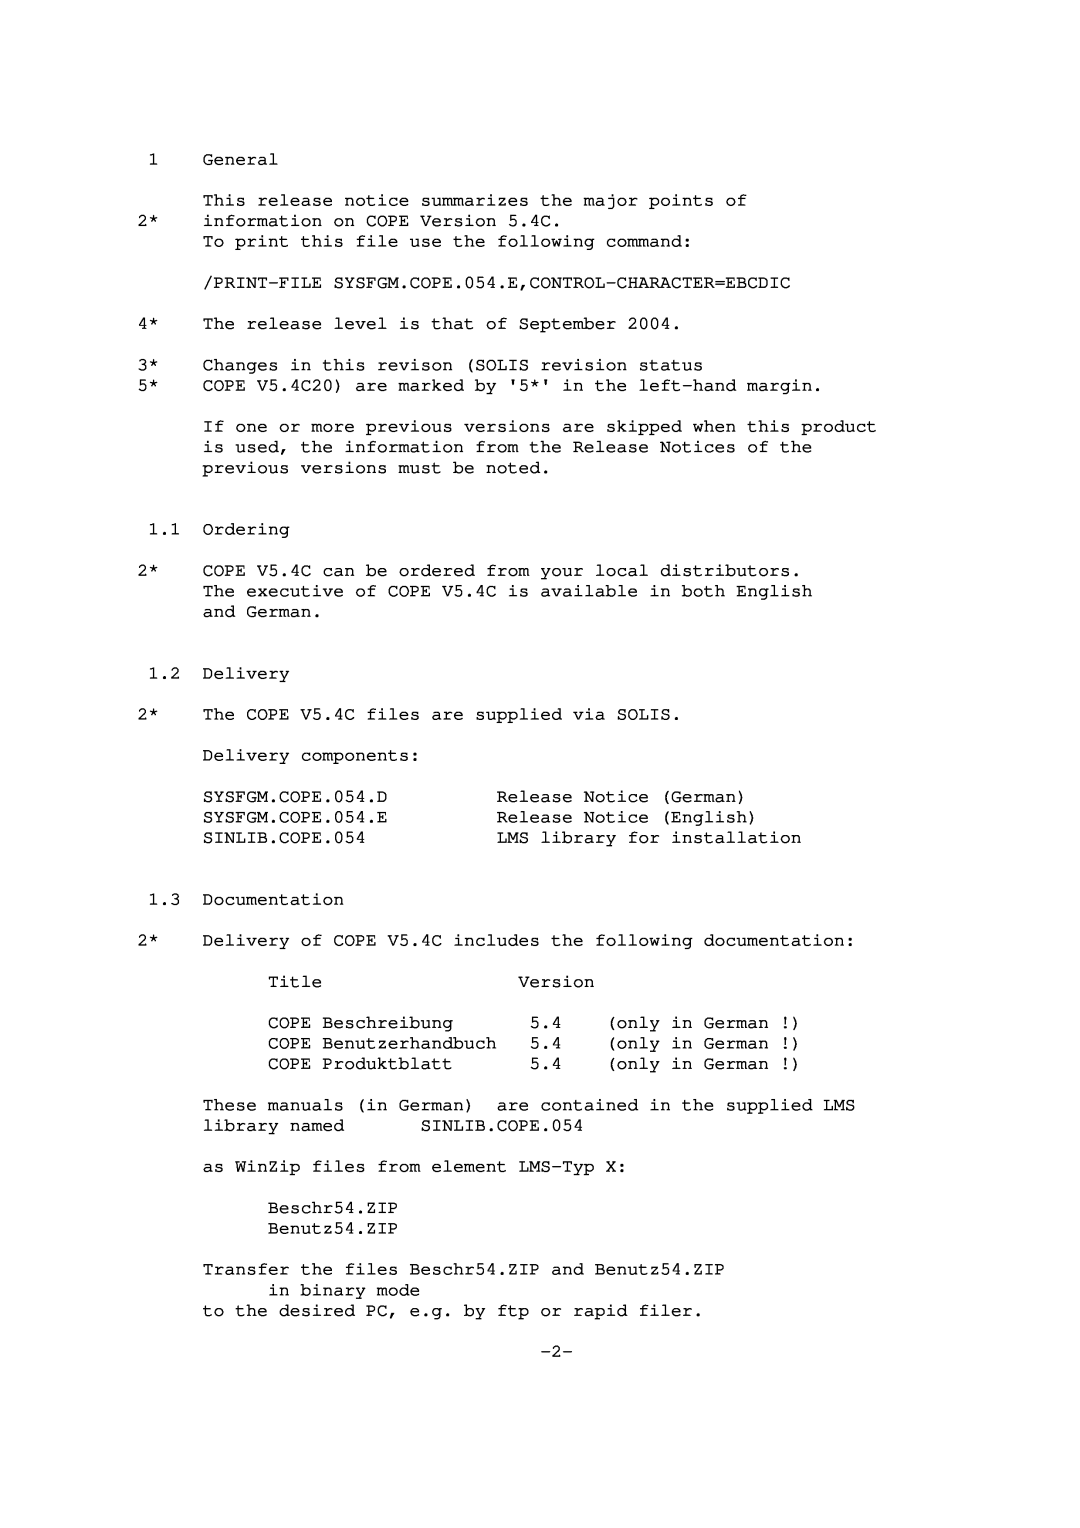 Fujitsu BS2000 General This release notice summarizes the major points of, 2* information on COPE Version 5.4C, Ordering 